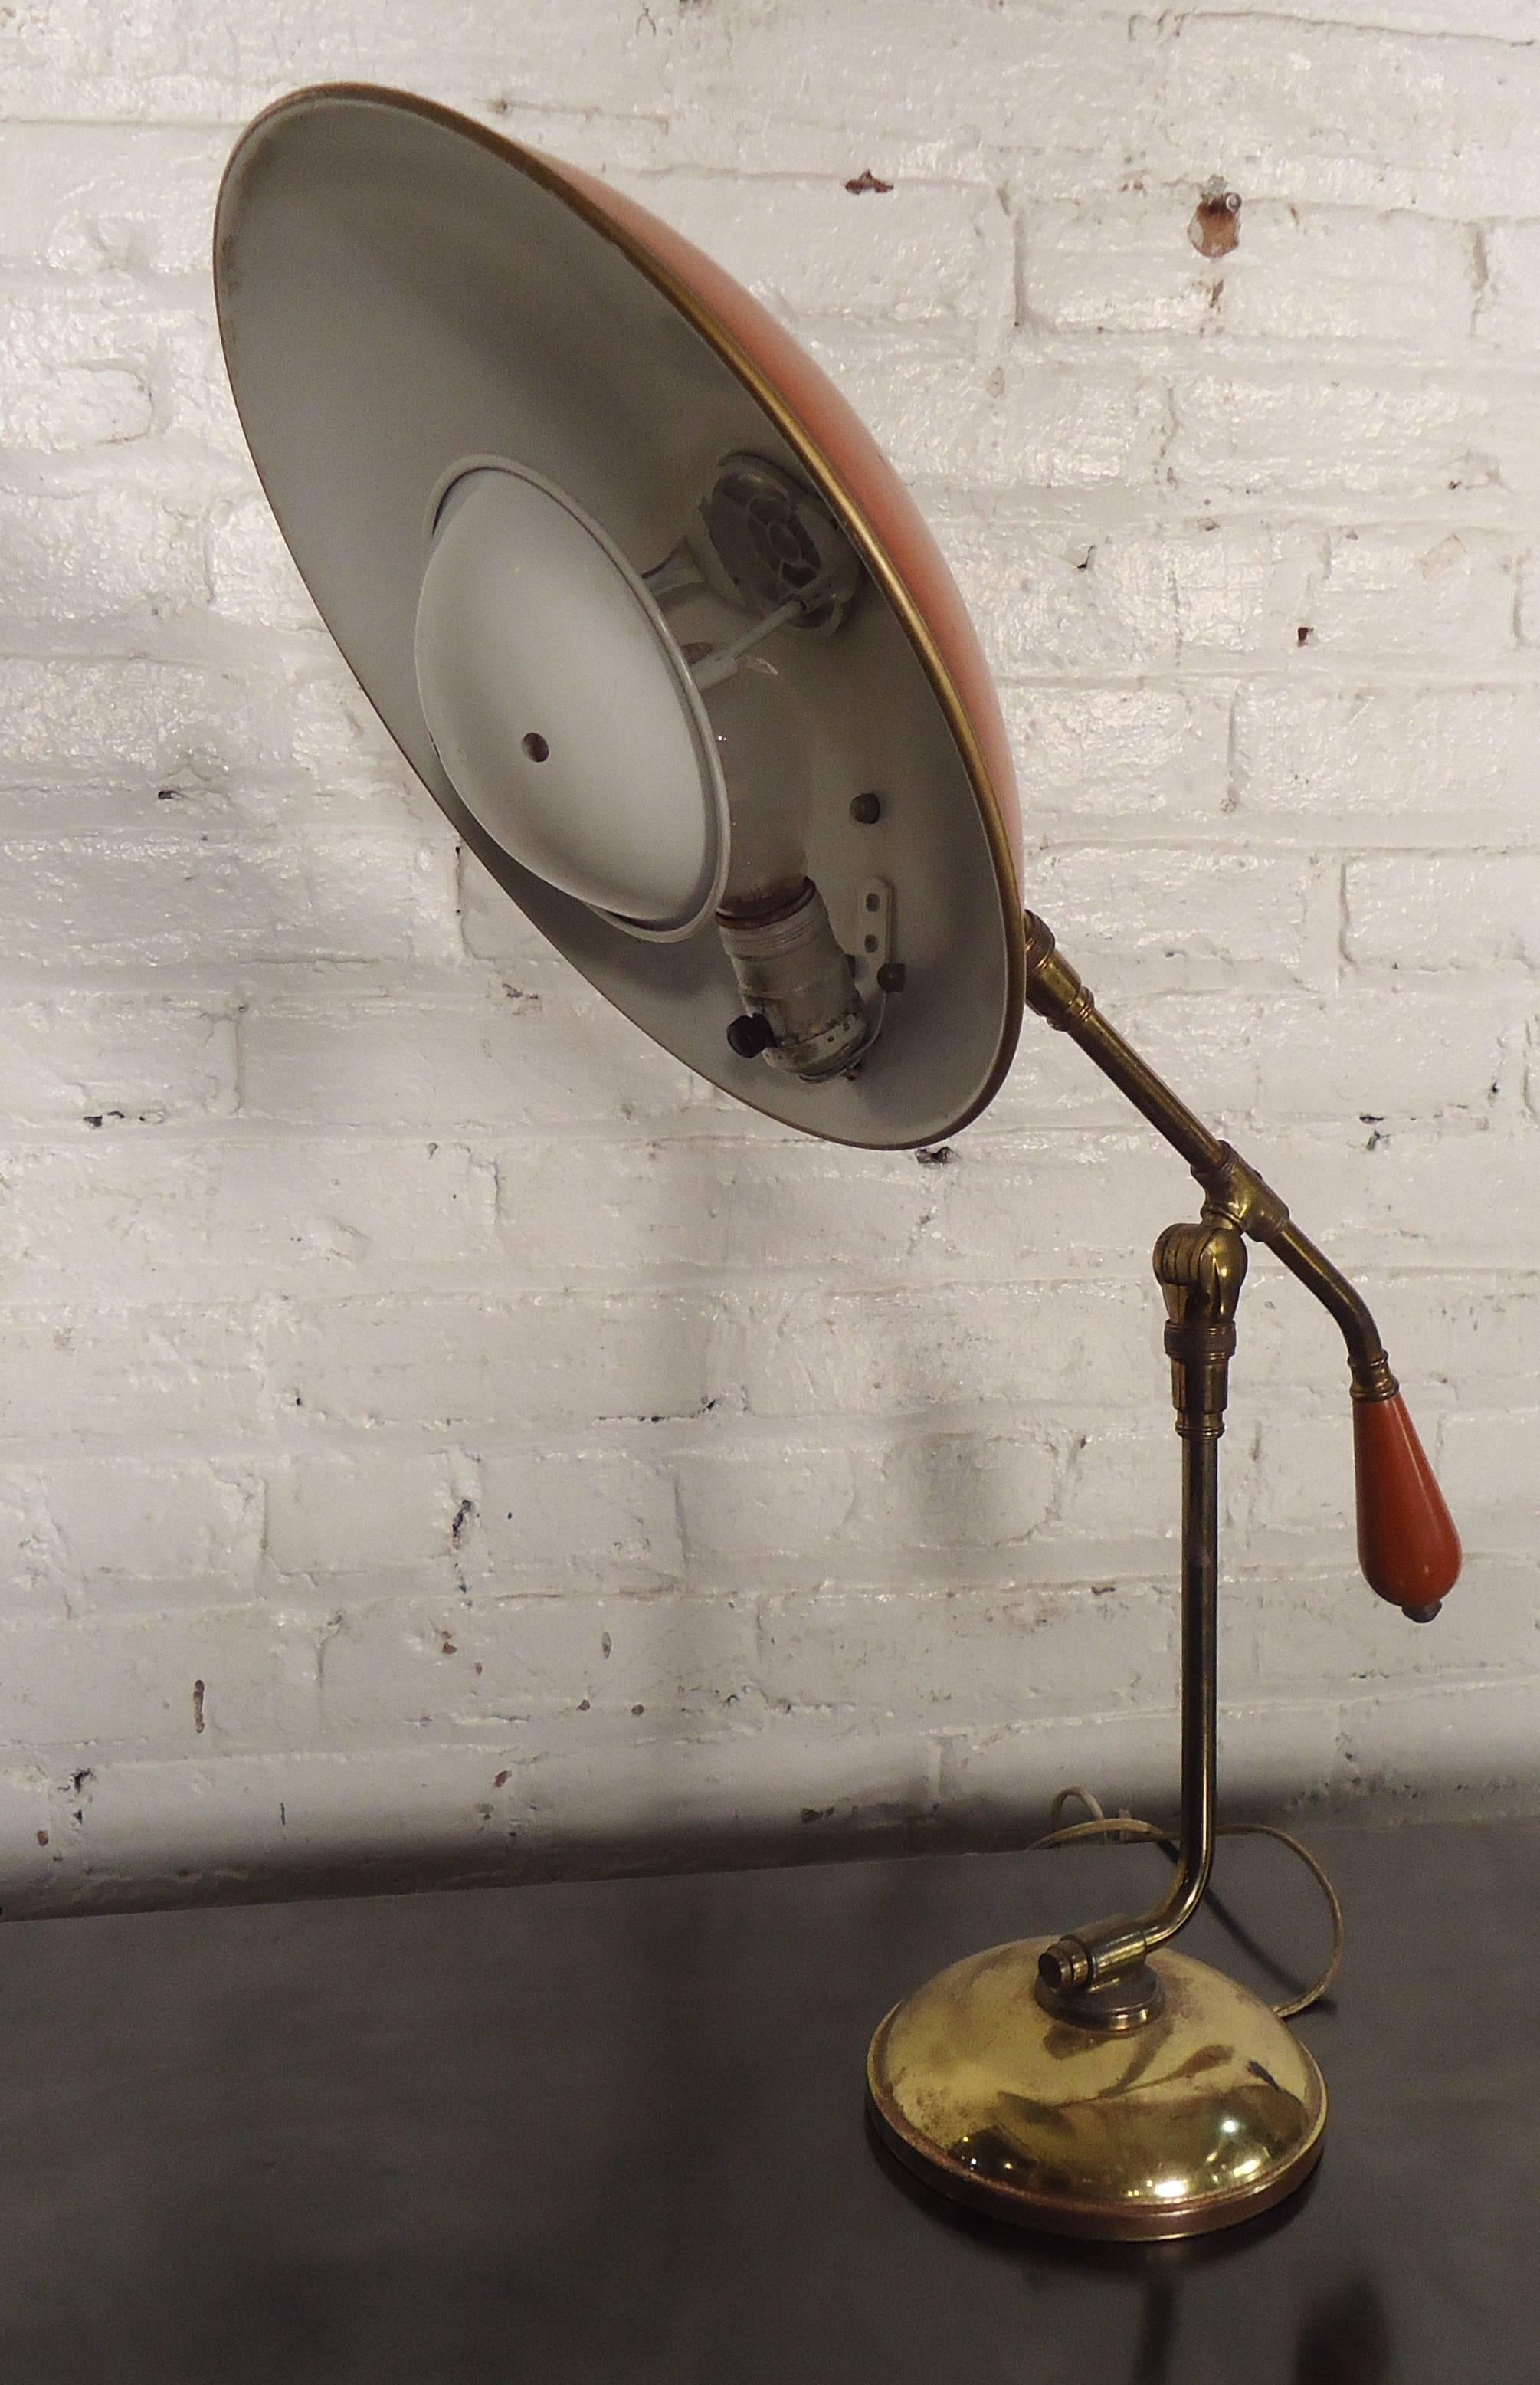 Handsome desk lamp by Gerald Thurston for Lightolier with saucer style shade and articulating design. Great design with bulb diffuser for warm but not blinding light.

(Please confirm item location - NY or NJ - with dealer).
 